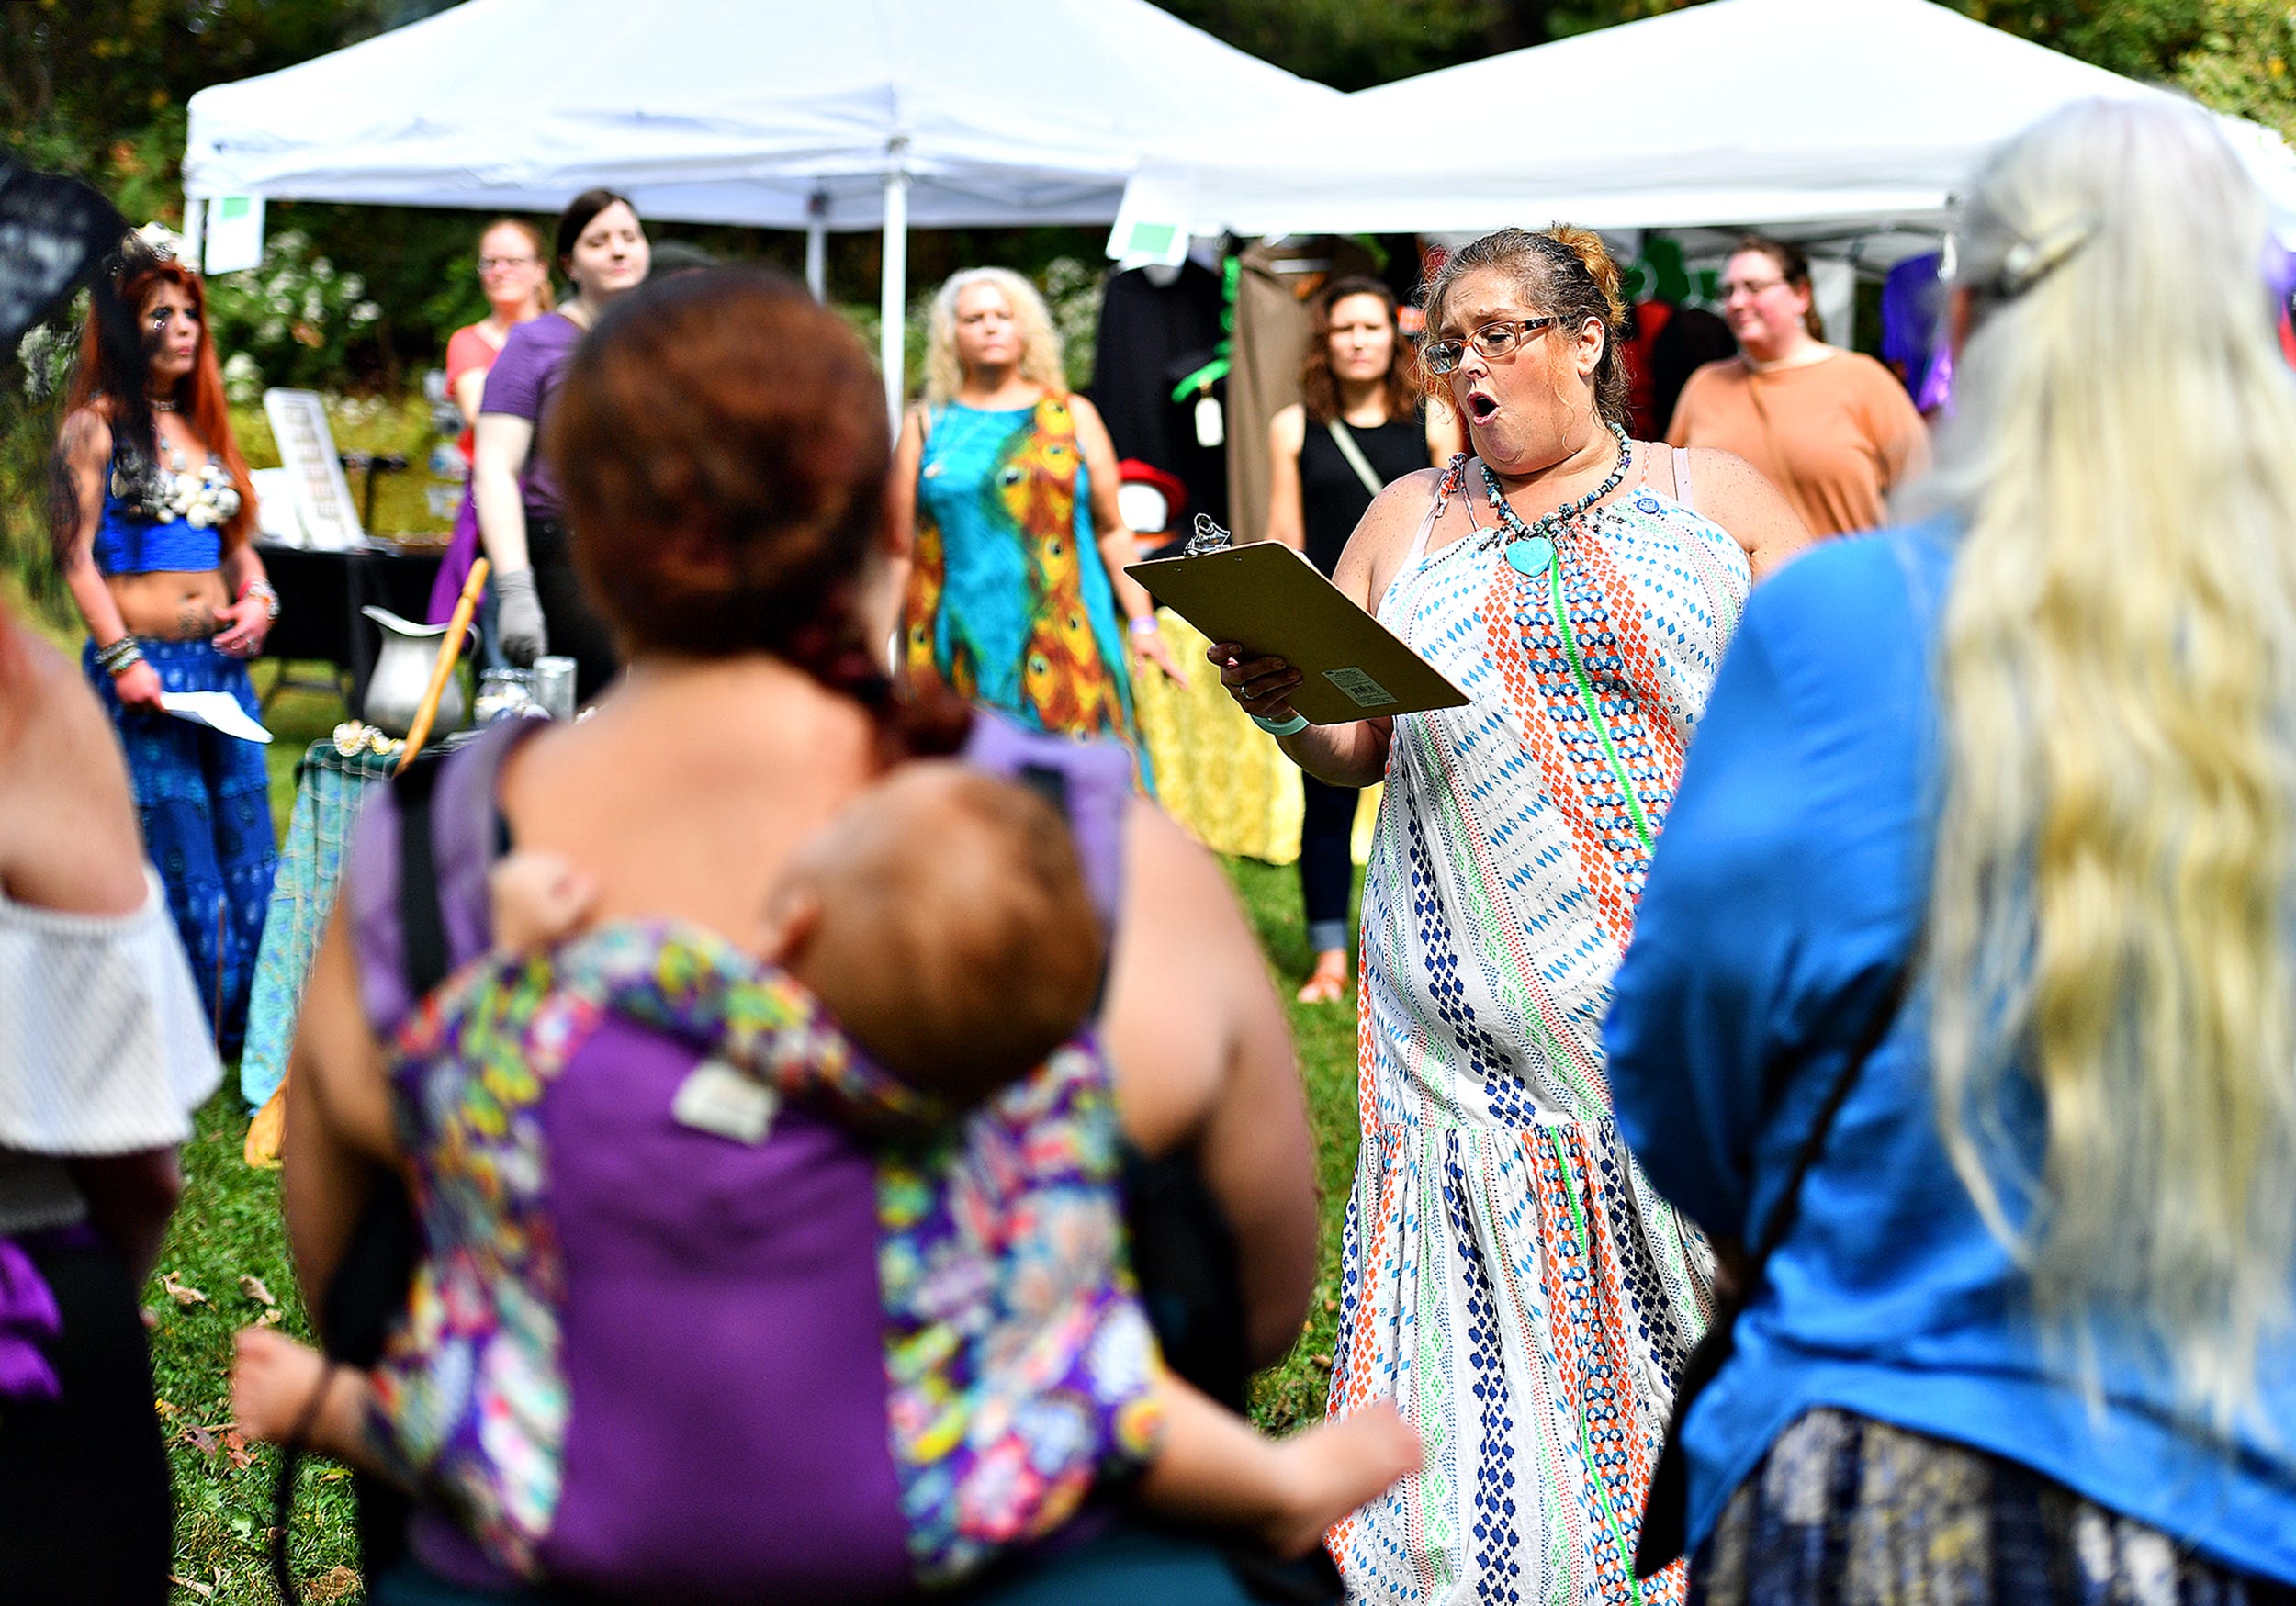 A harvest ritual is performed as the main ritual of the day, to honor both the harvest time of year and to cultivate community, during the 8th annual Pagan Pride Festival at Samuel S. Lewis State Park in Lower Windsor Township, Saturday, Sept. 28, 2019. Dawn J. Sagert photo